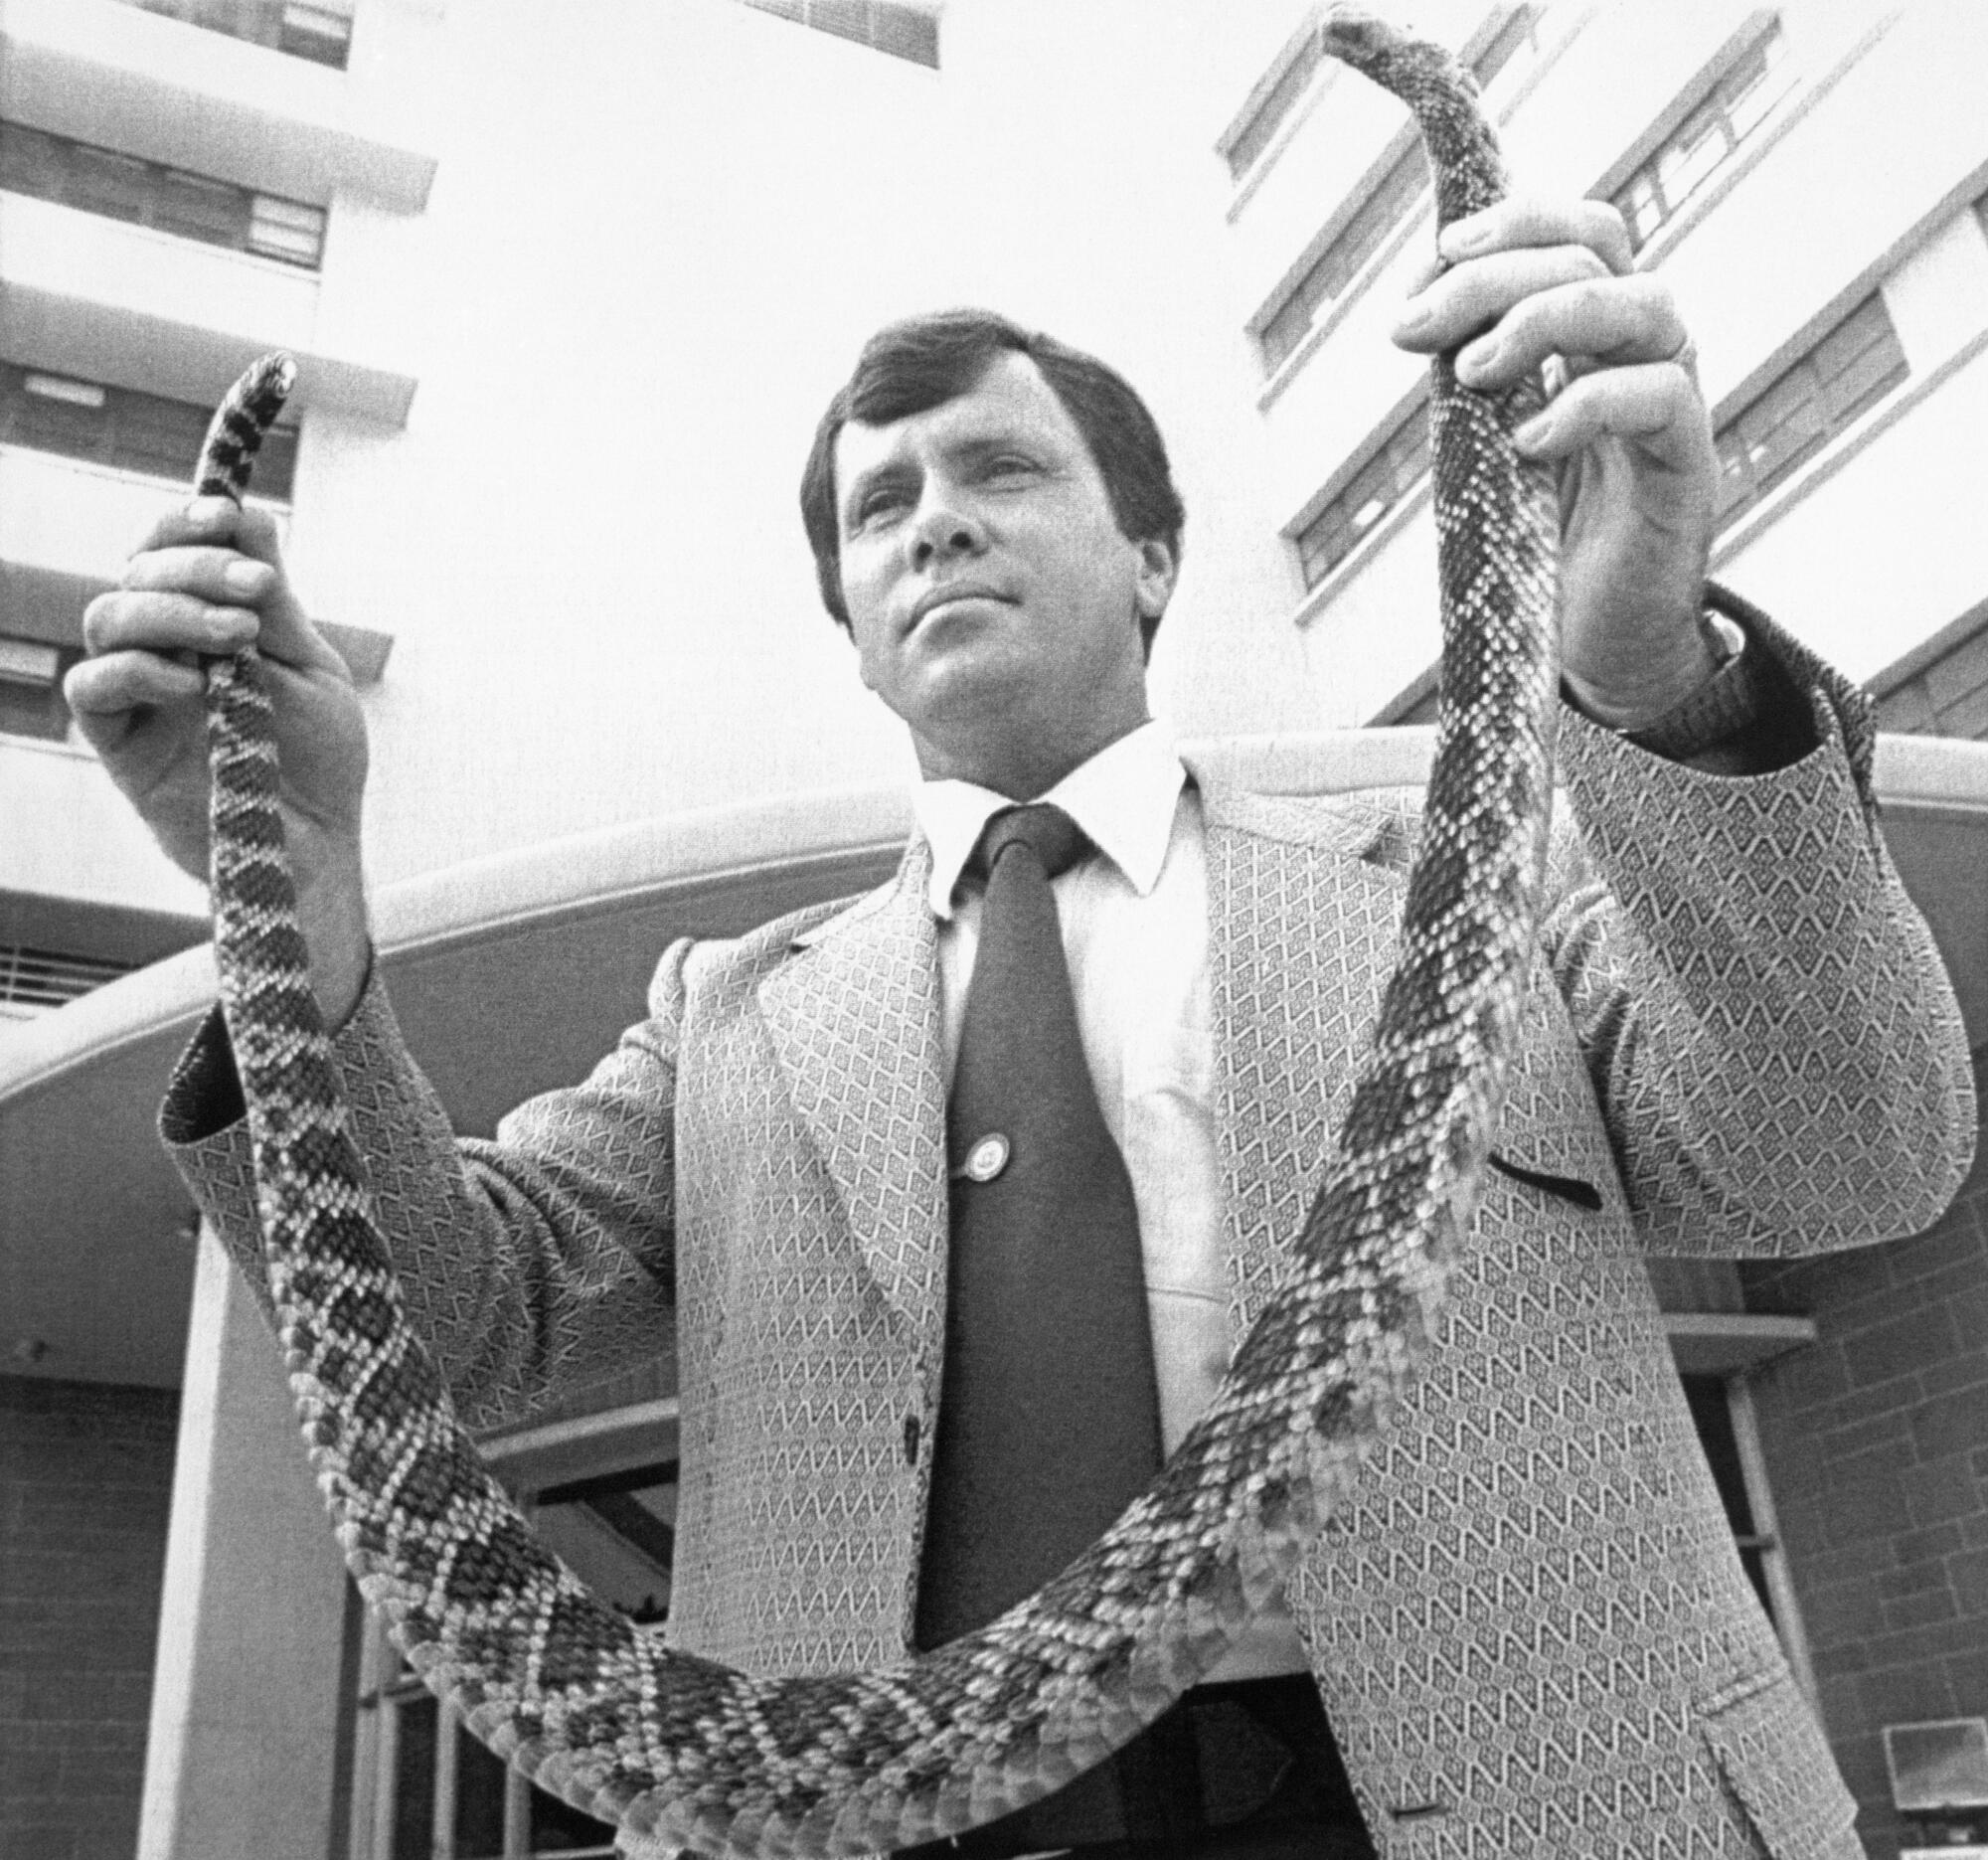 A man holds up a snake with his two hands.